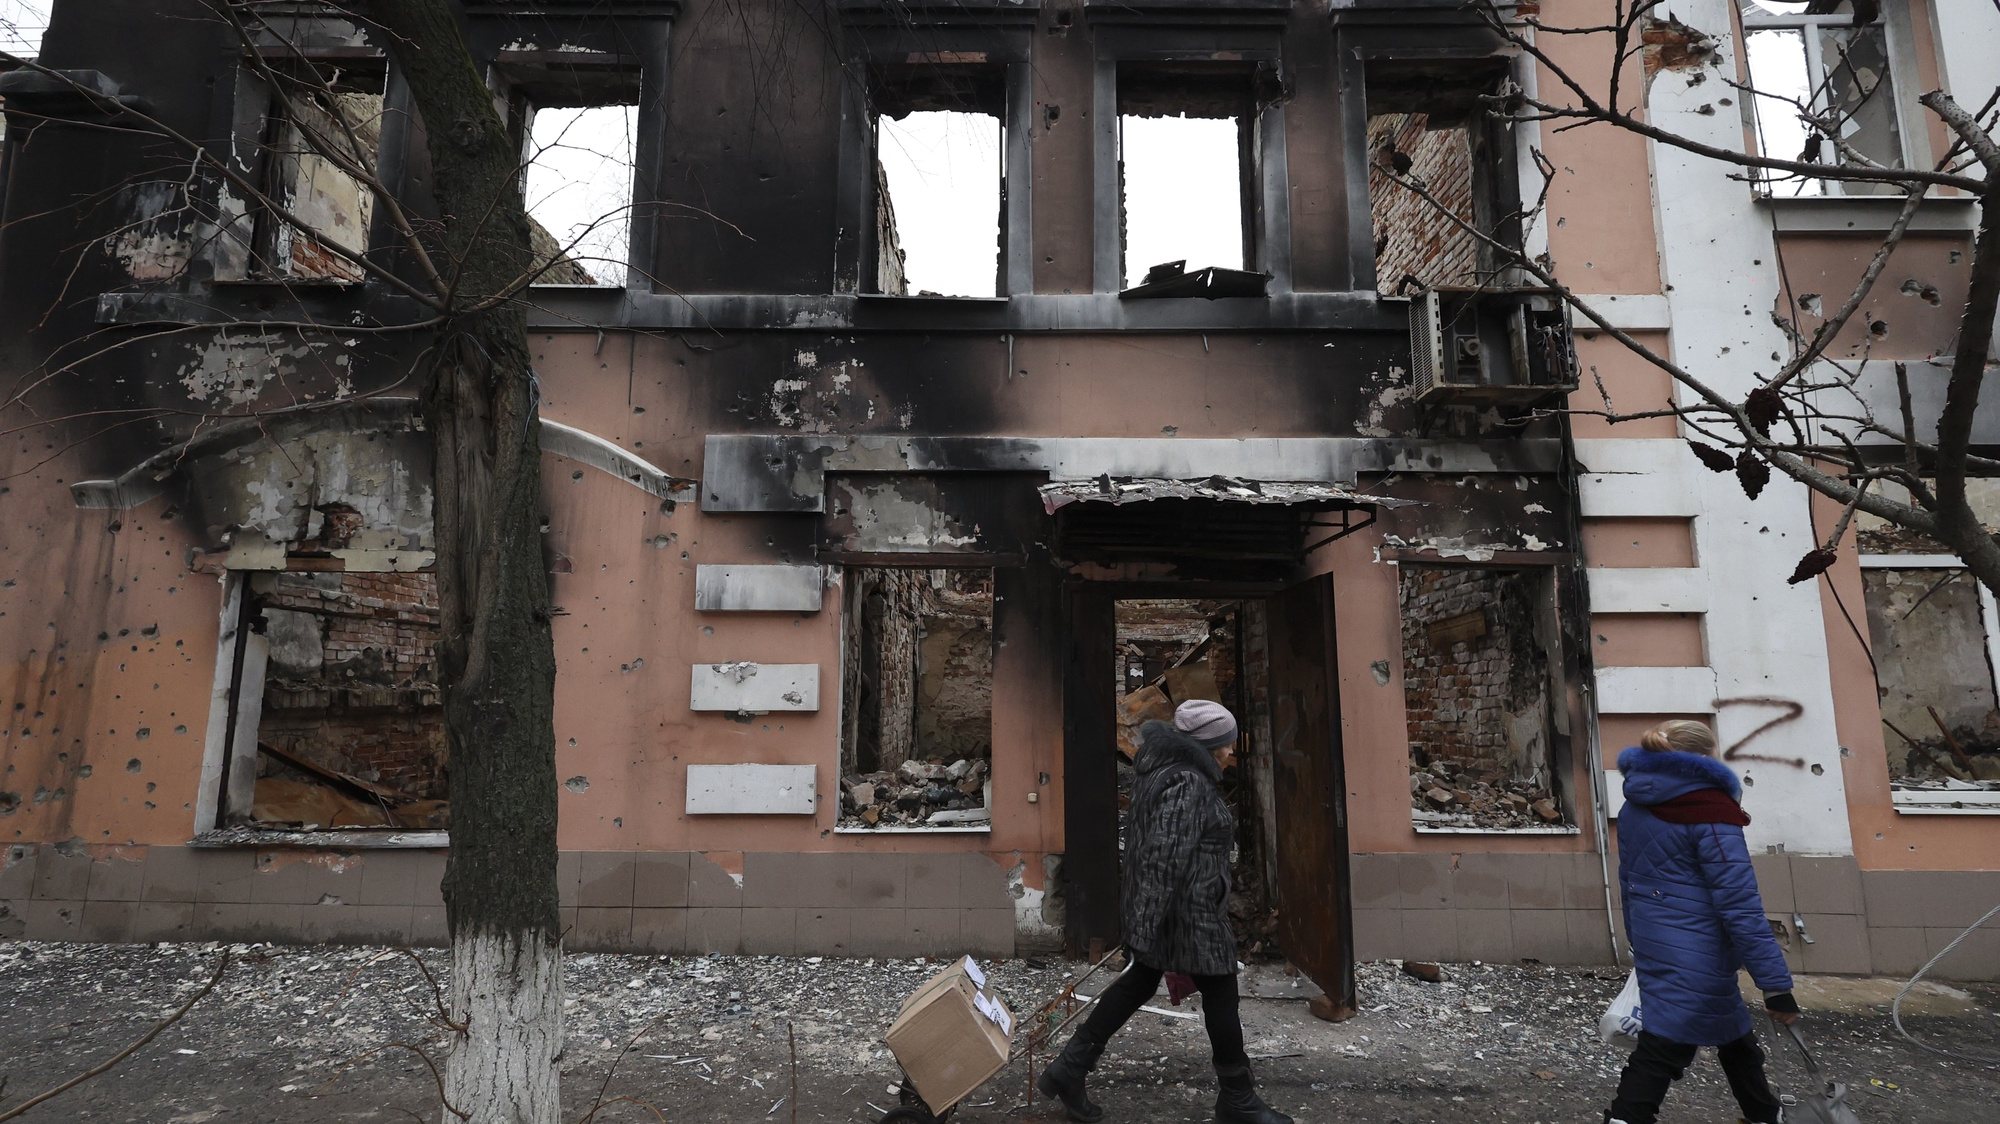 epa10376588 Local people walk past a destroyed building in Izium, Kharkiv region, Ukraine, 22 December 2022. Volunteers provide some 40 people with fresh hot meals per day. Russian troops on 24 February entered Ukrainian territory, starting a conflict that has provoked destruction and a humanitarian crisis.  EPA/SERGIY KOZLOV